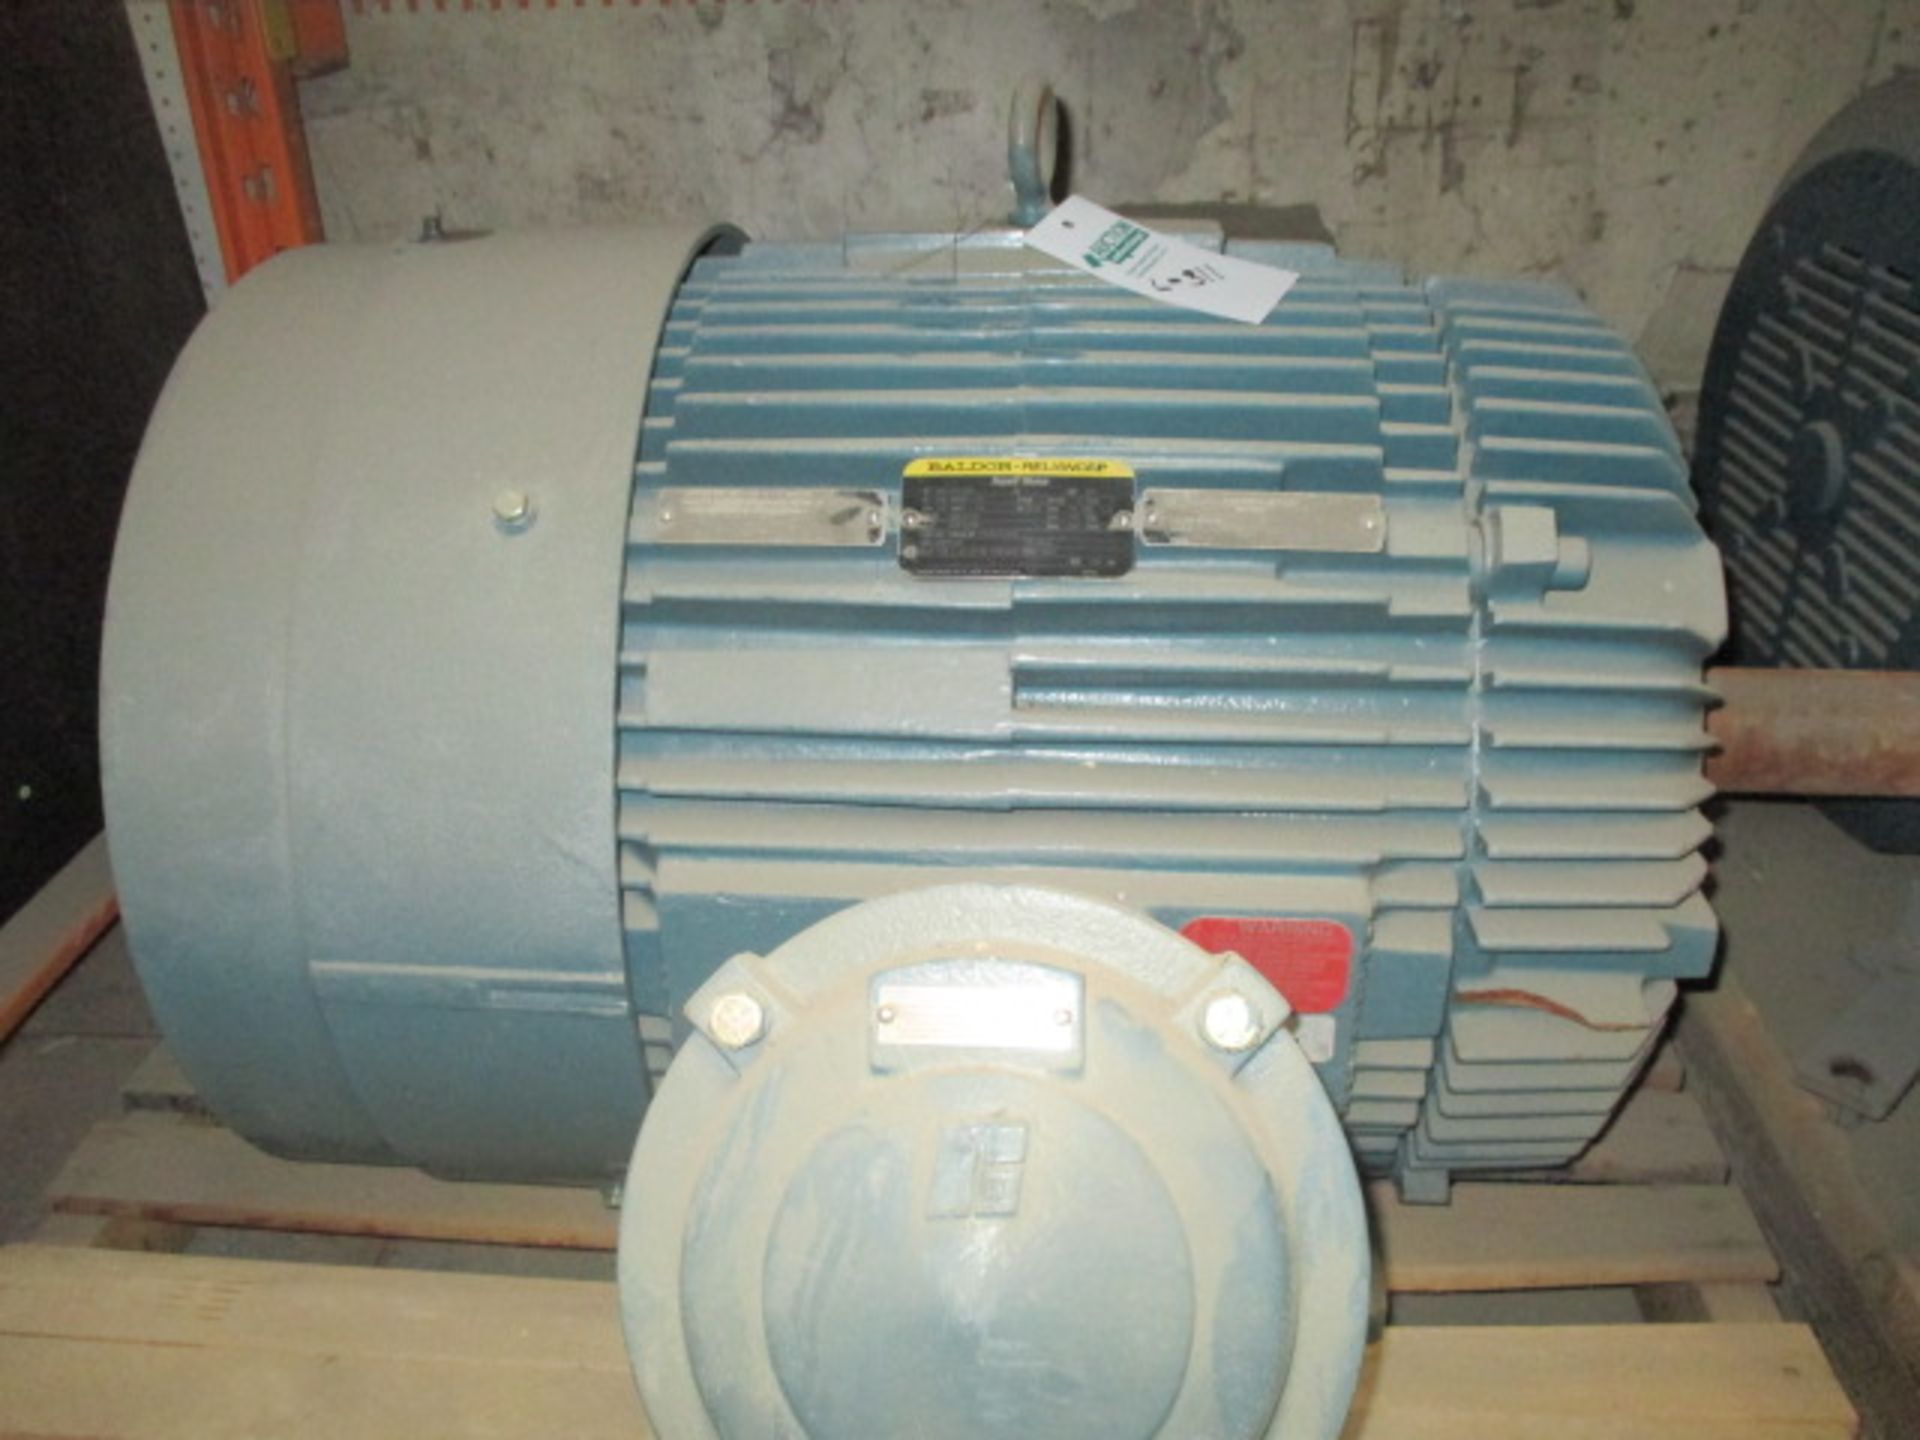 Baldor Electric Motor with Misc Fittings and Valve 100hp , 400 volt, 3phase, 133 amps